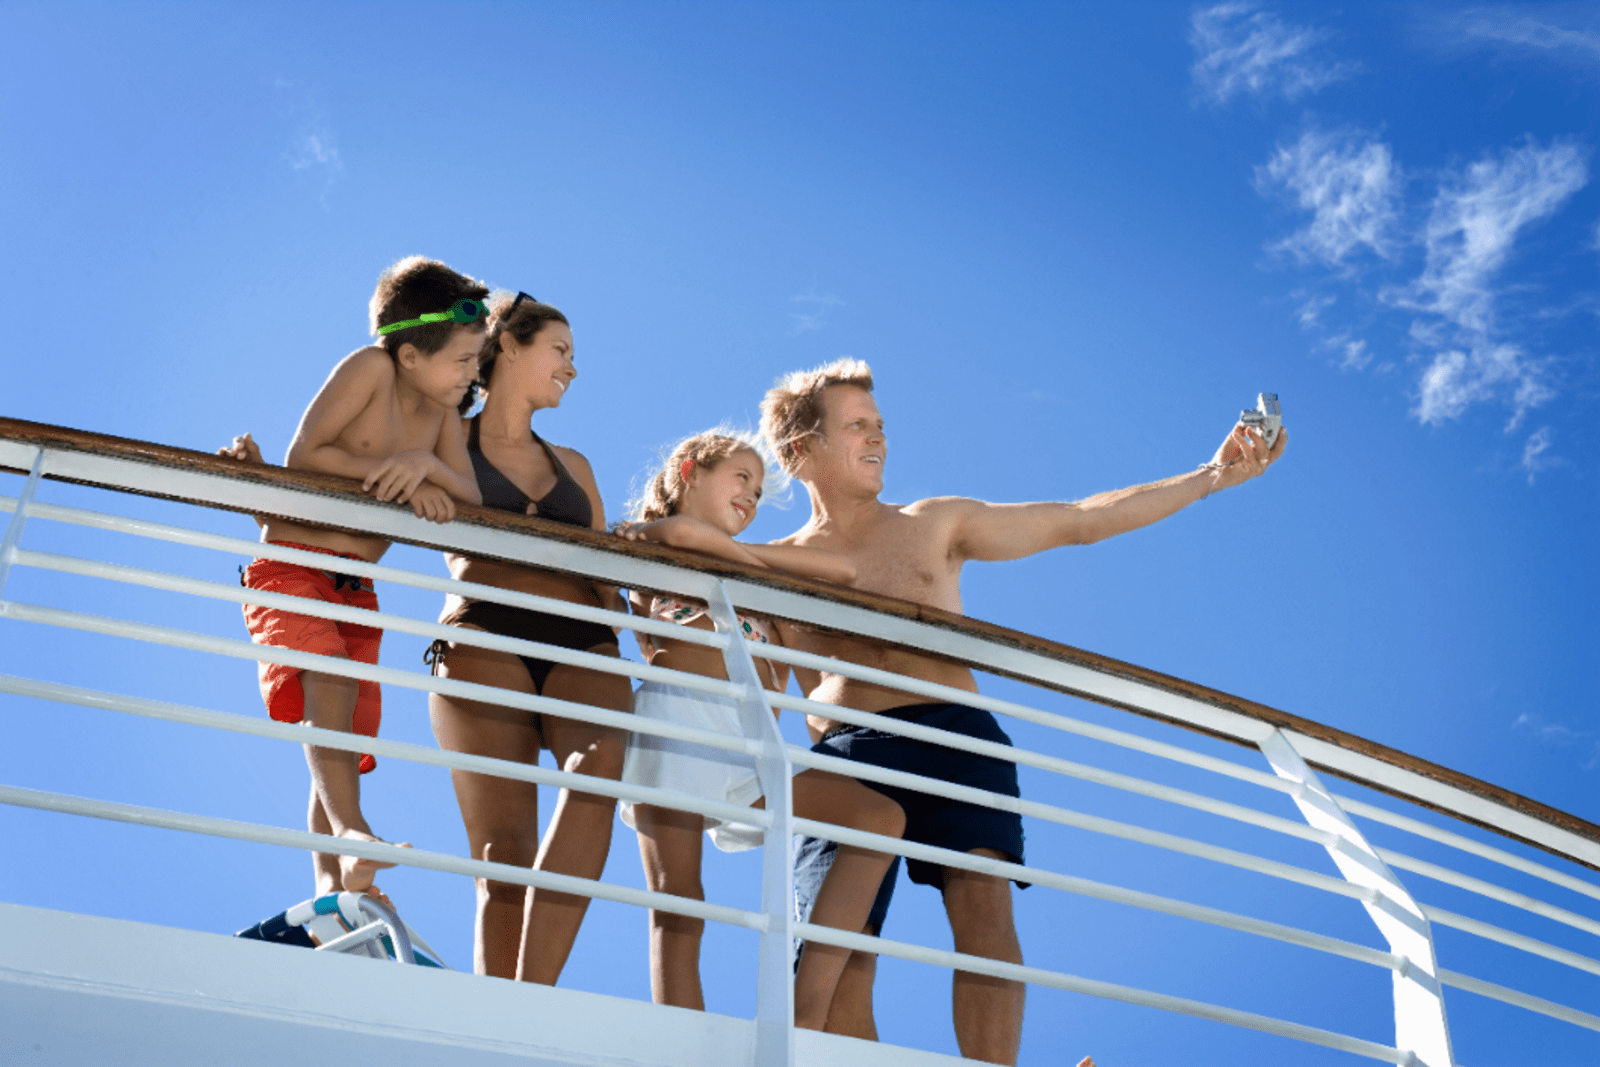 A family taking a selfie on the deck of a cruise ship